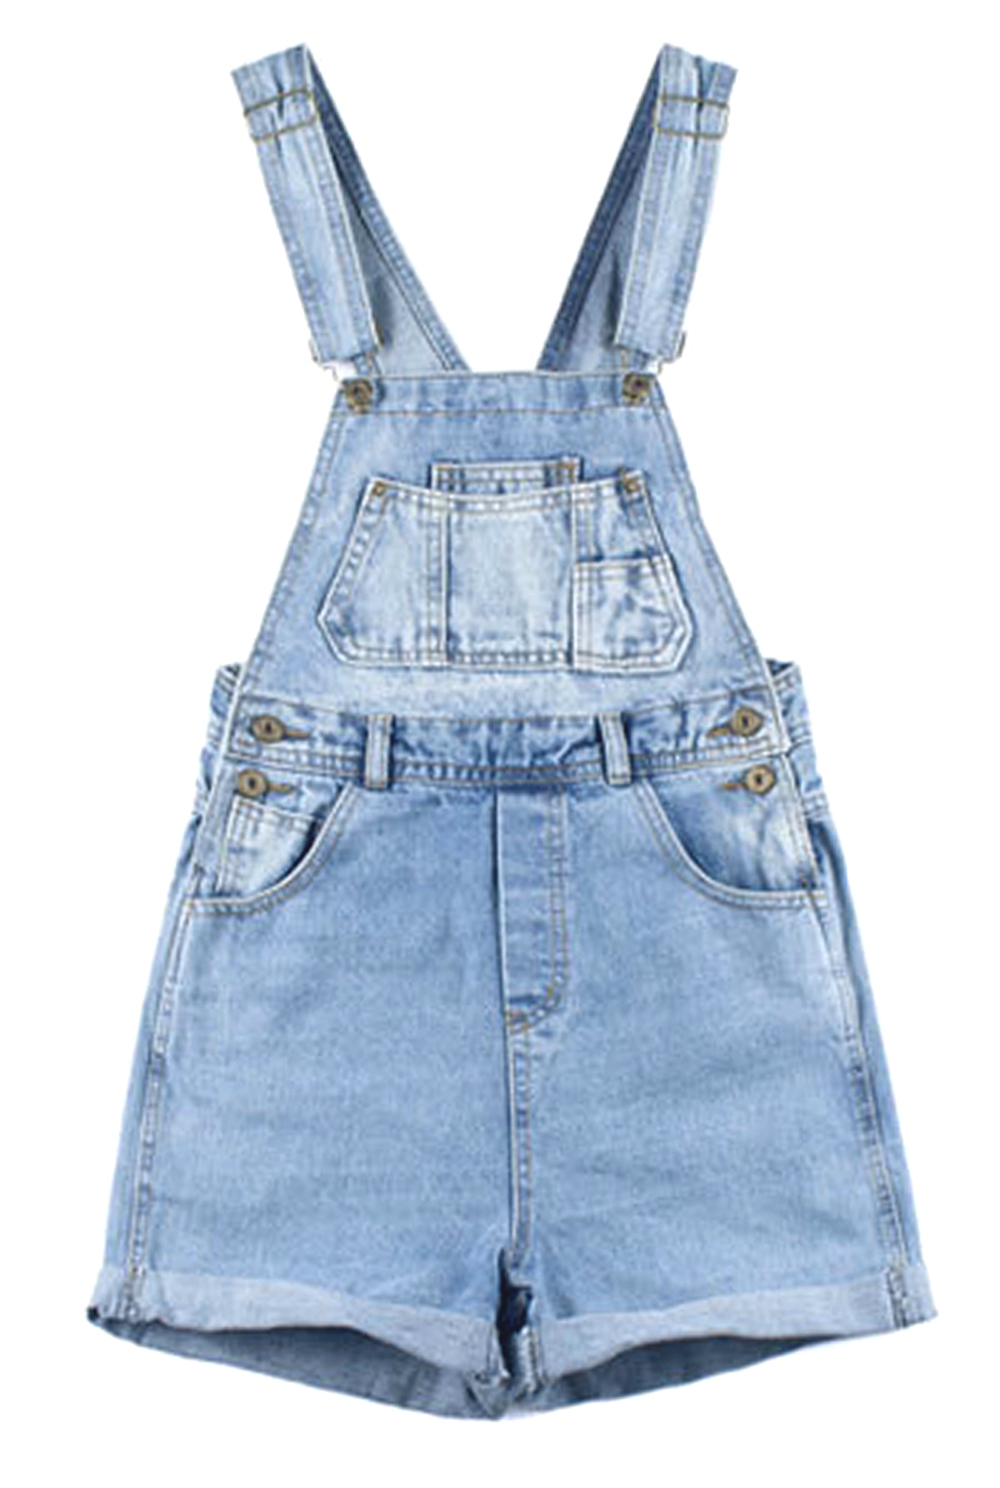 js15 Celebrity Style Vintage White Wash Womens Denim Overall Shorts ...